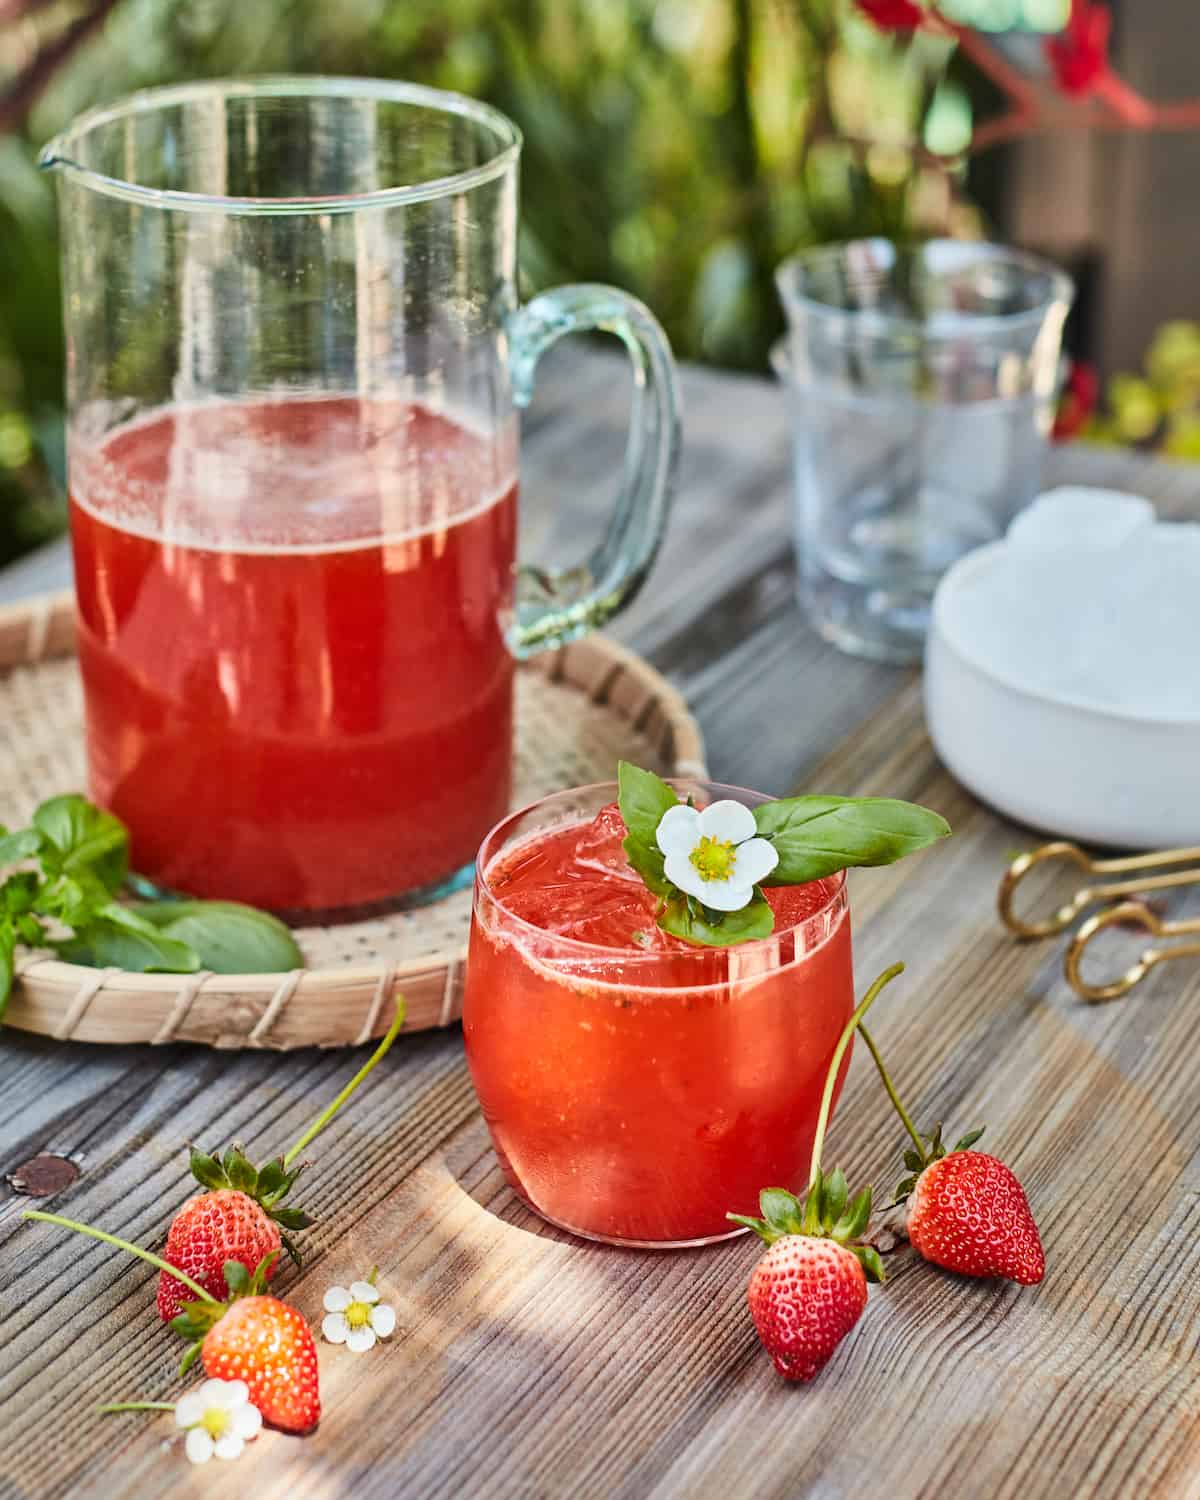 A glass of strawberry basil lemonade with a basil leaf and flower next to a pitcher of strawberry basil lemonade.